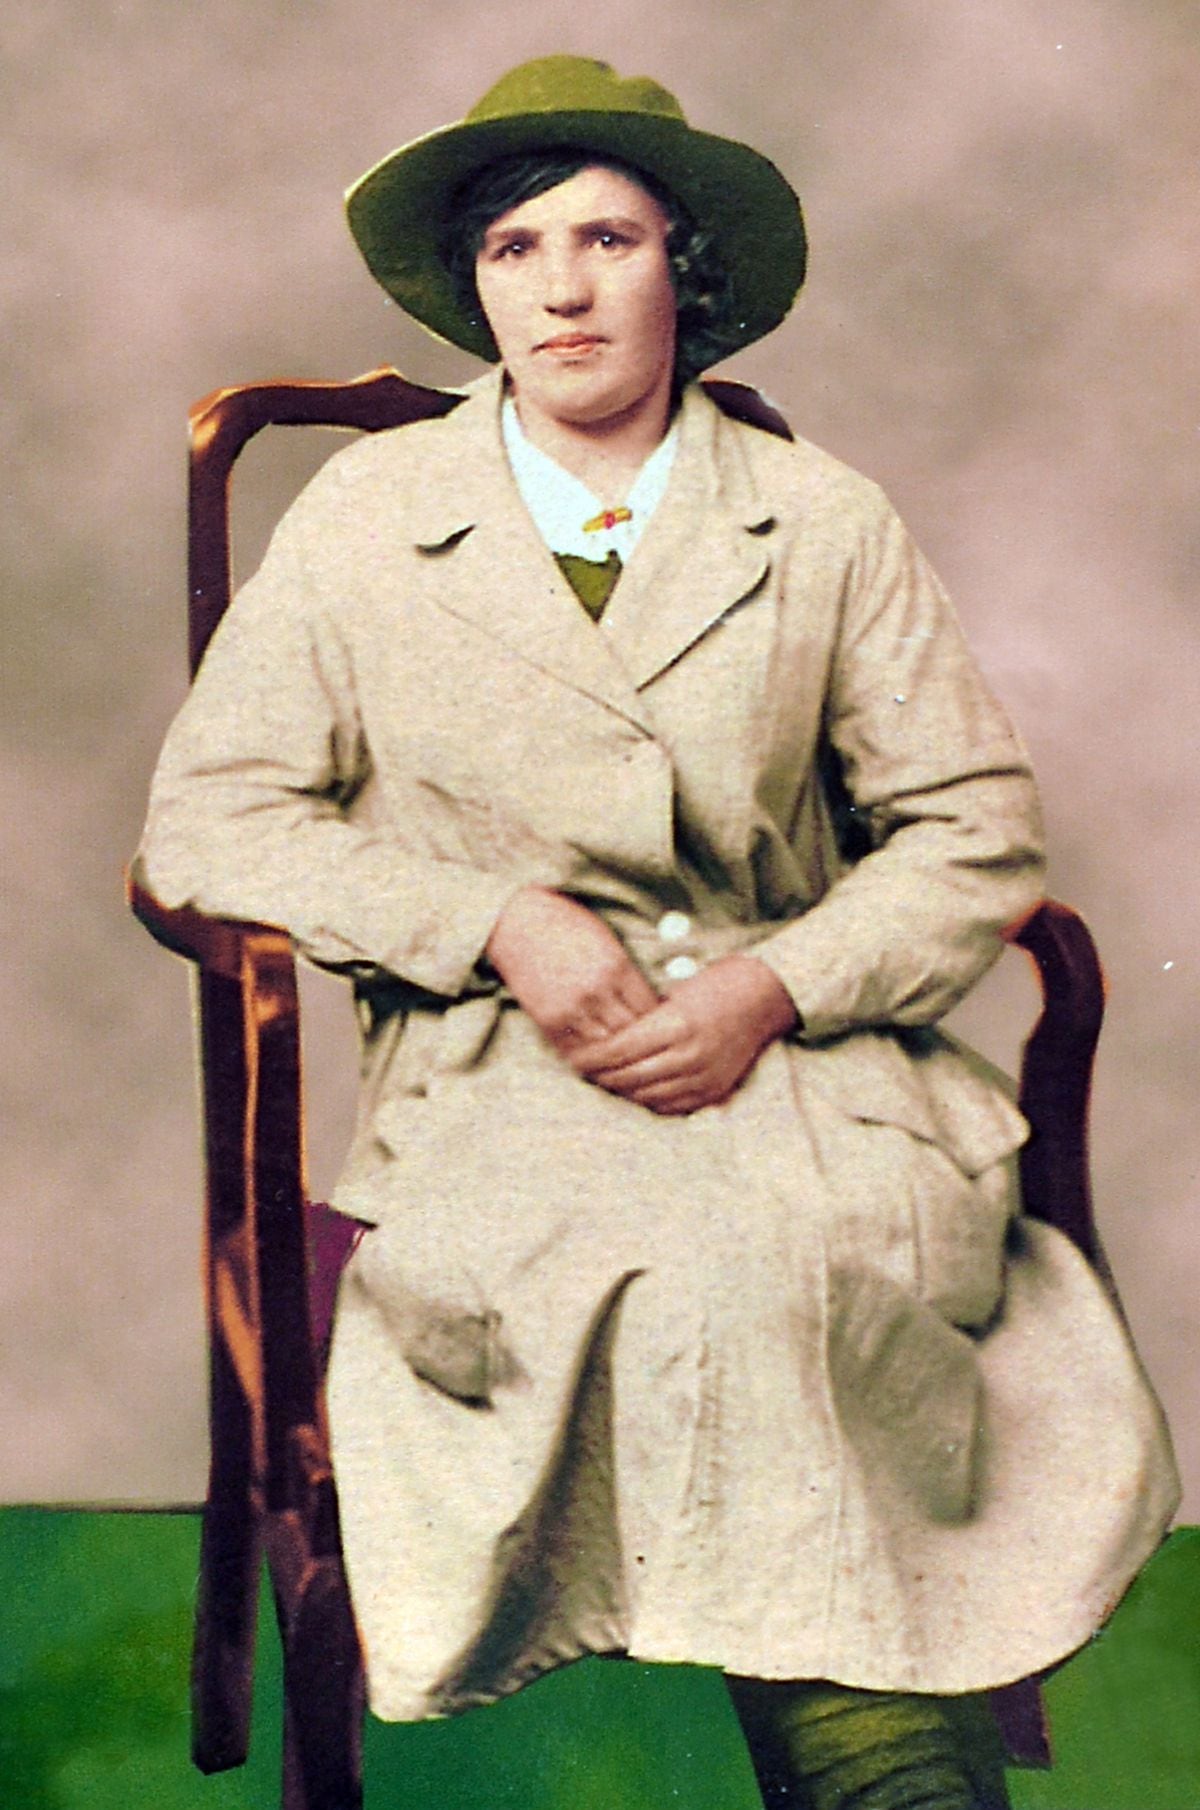 Mum Elsie was a Land Girl too - in the Great War.